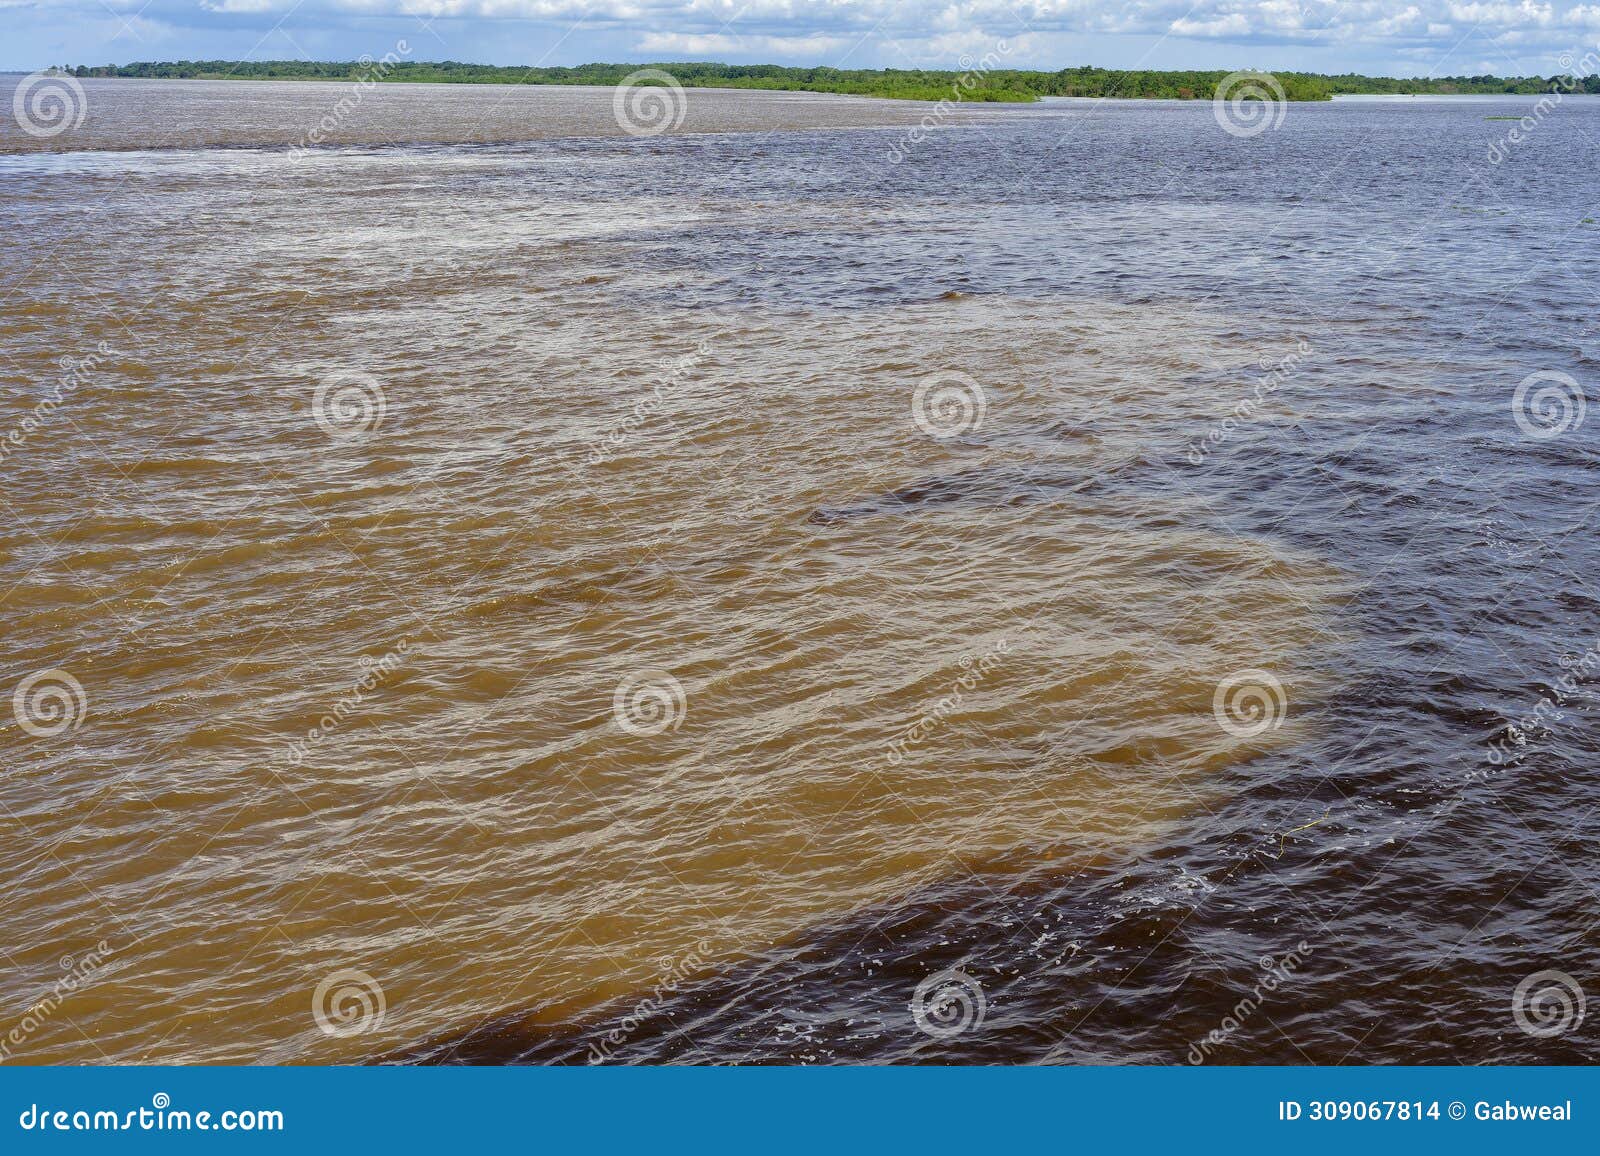 rio negro and solimoes forming the amazon river, manaus, amazonas state, brazil